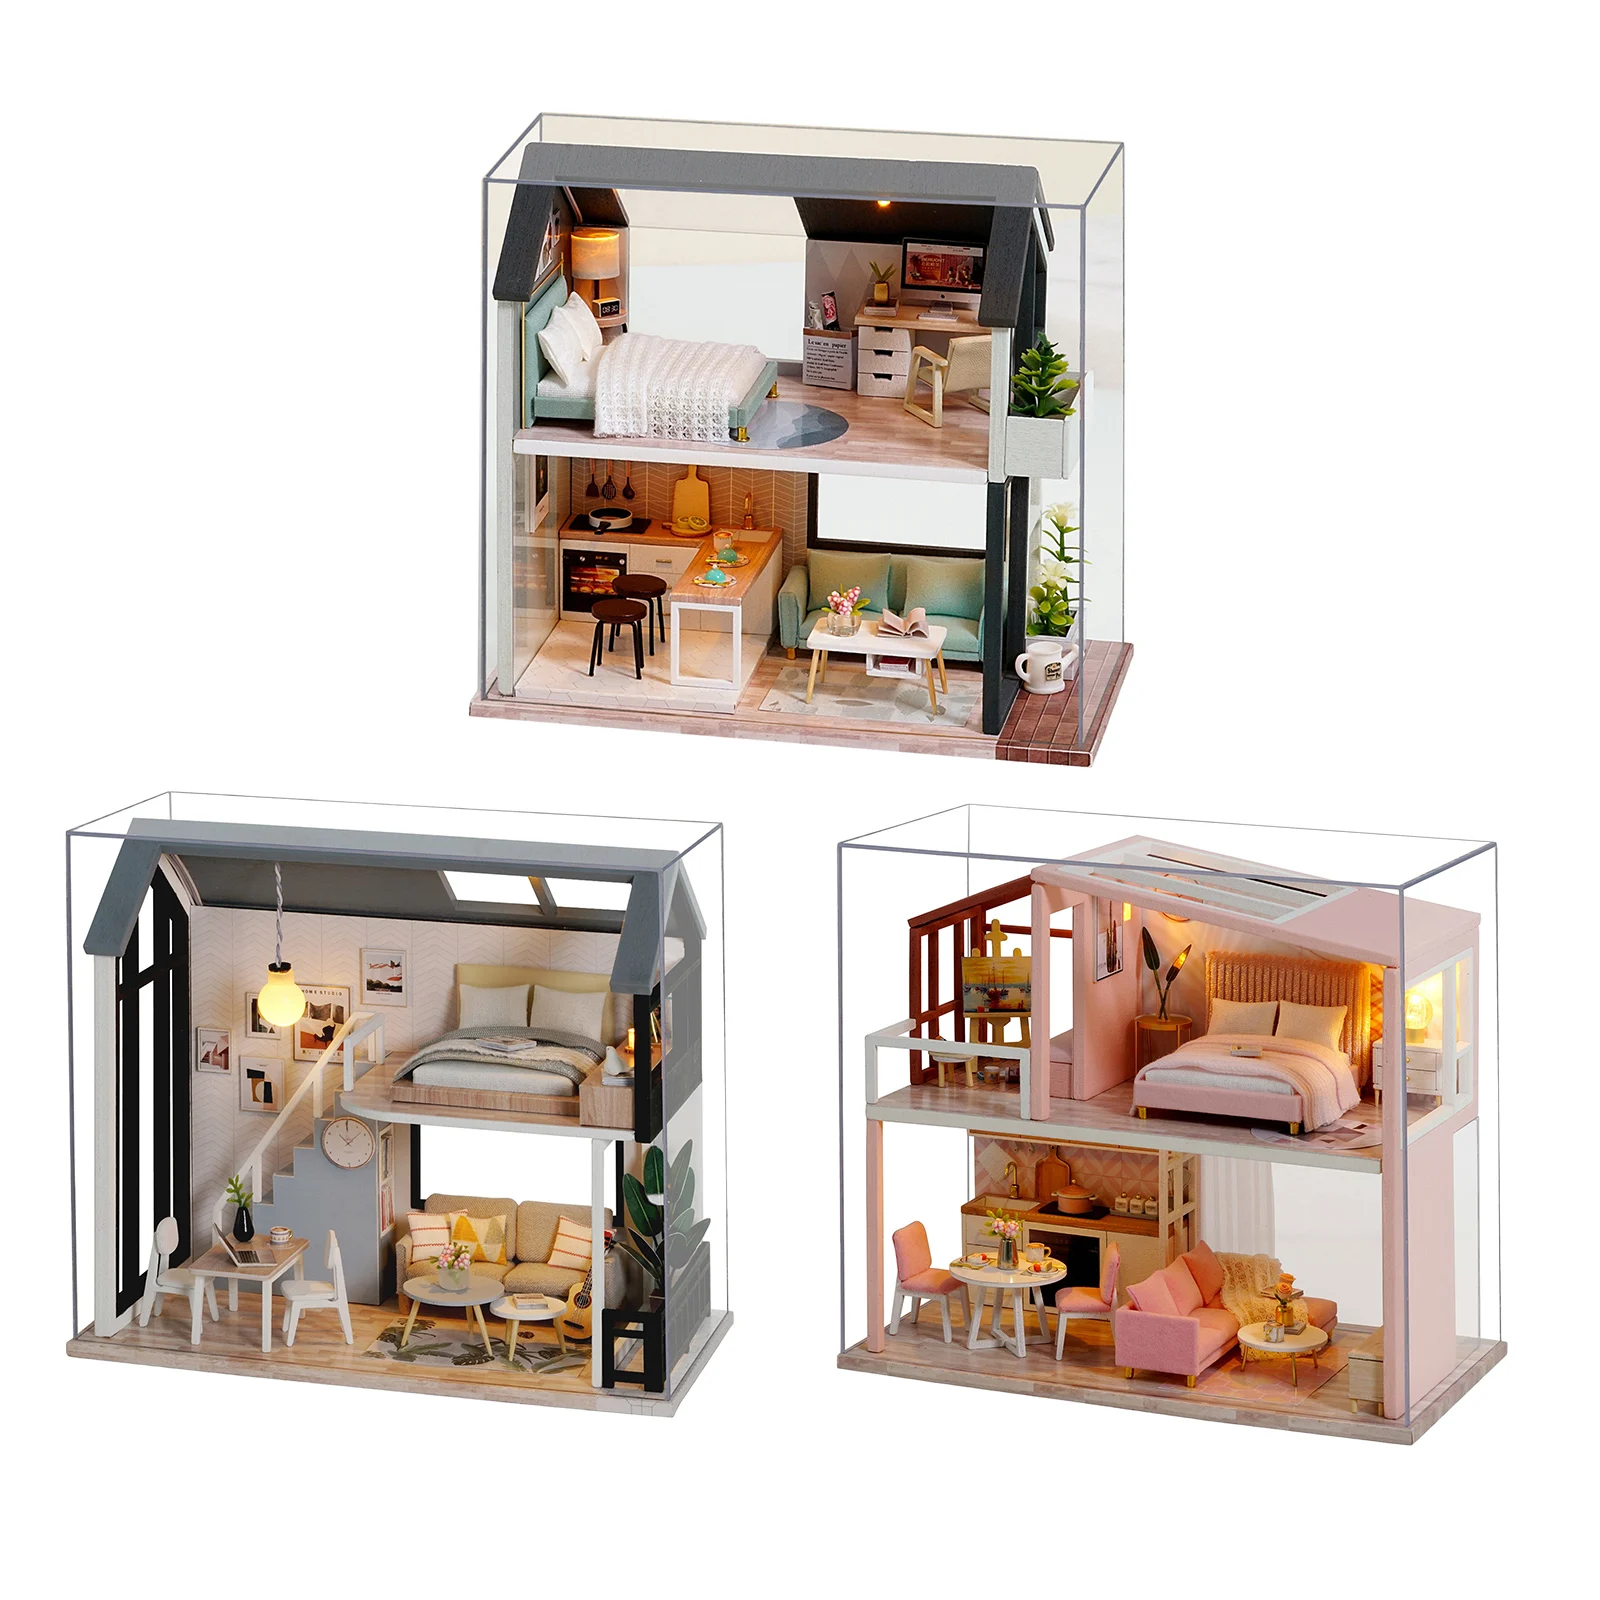 1:24 Doll House DIY Miniature with Furniture Assemble Dollhouse Kit